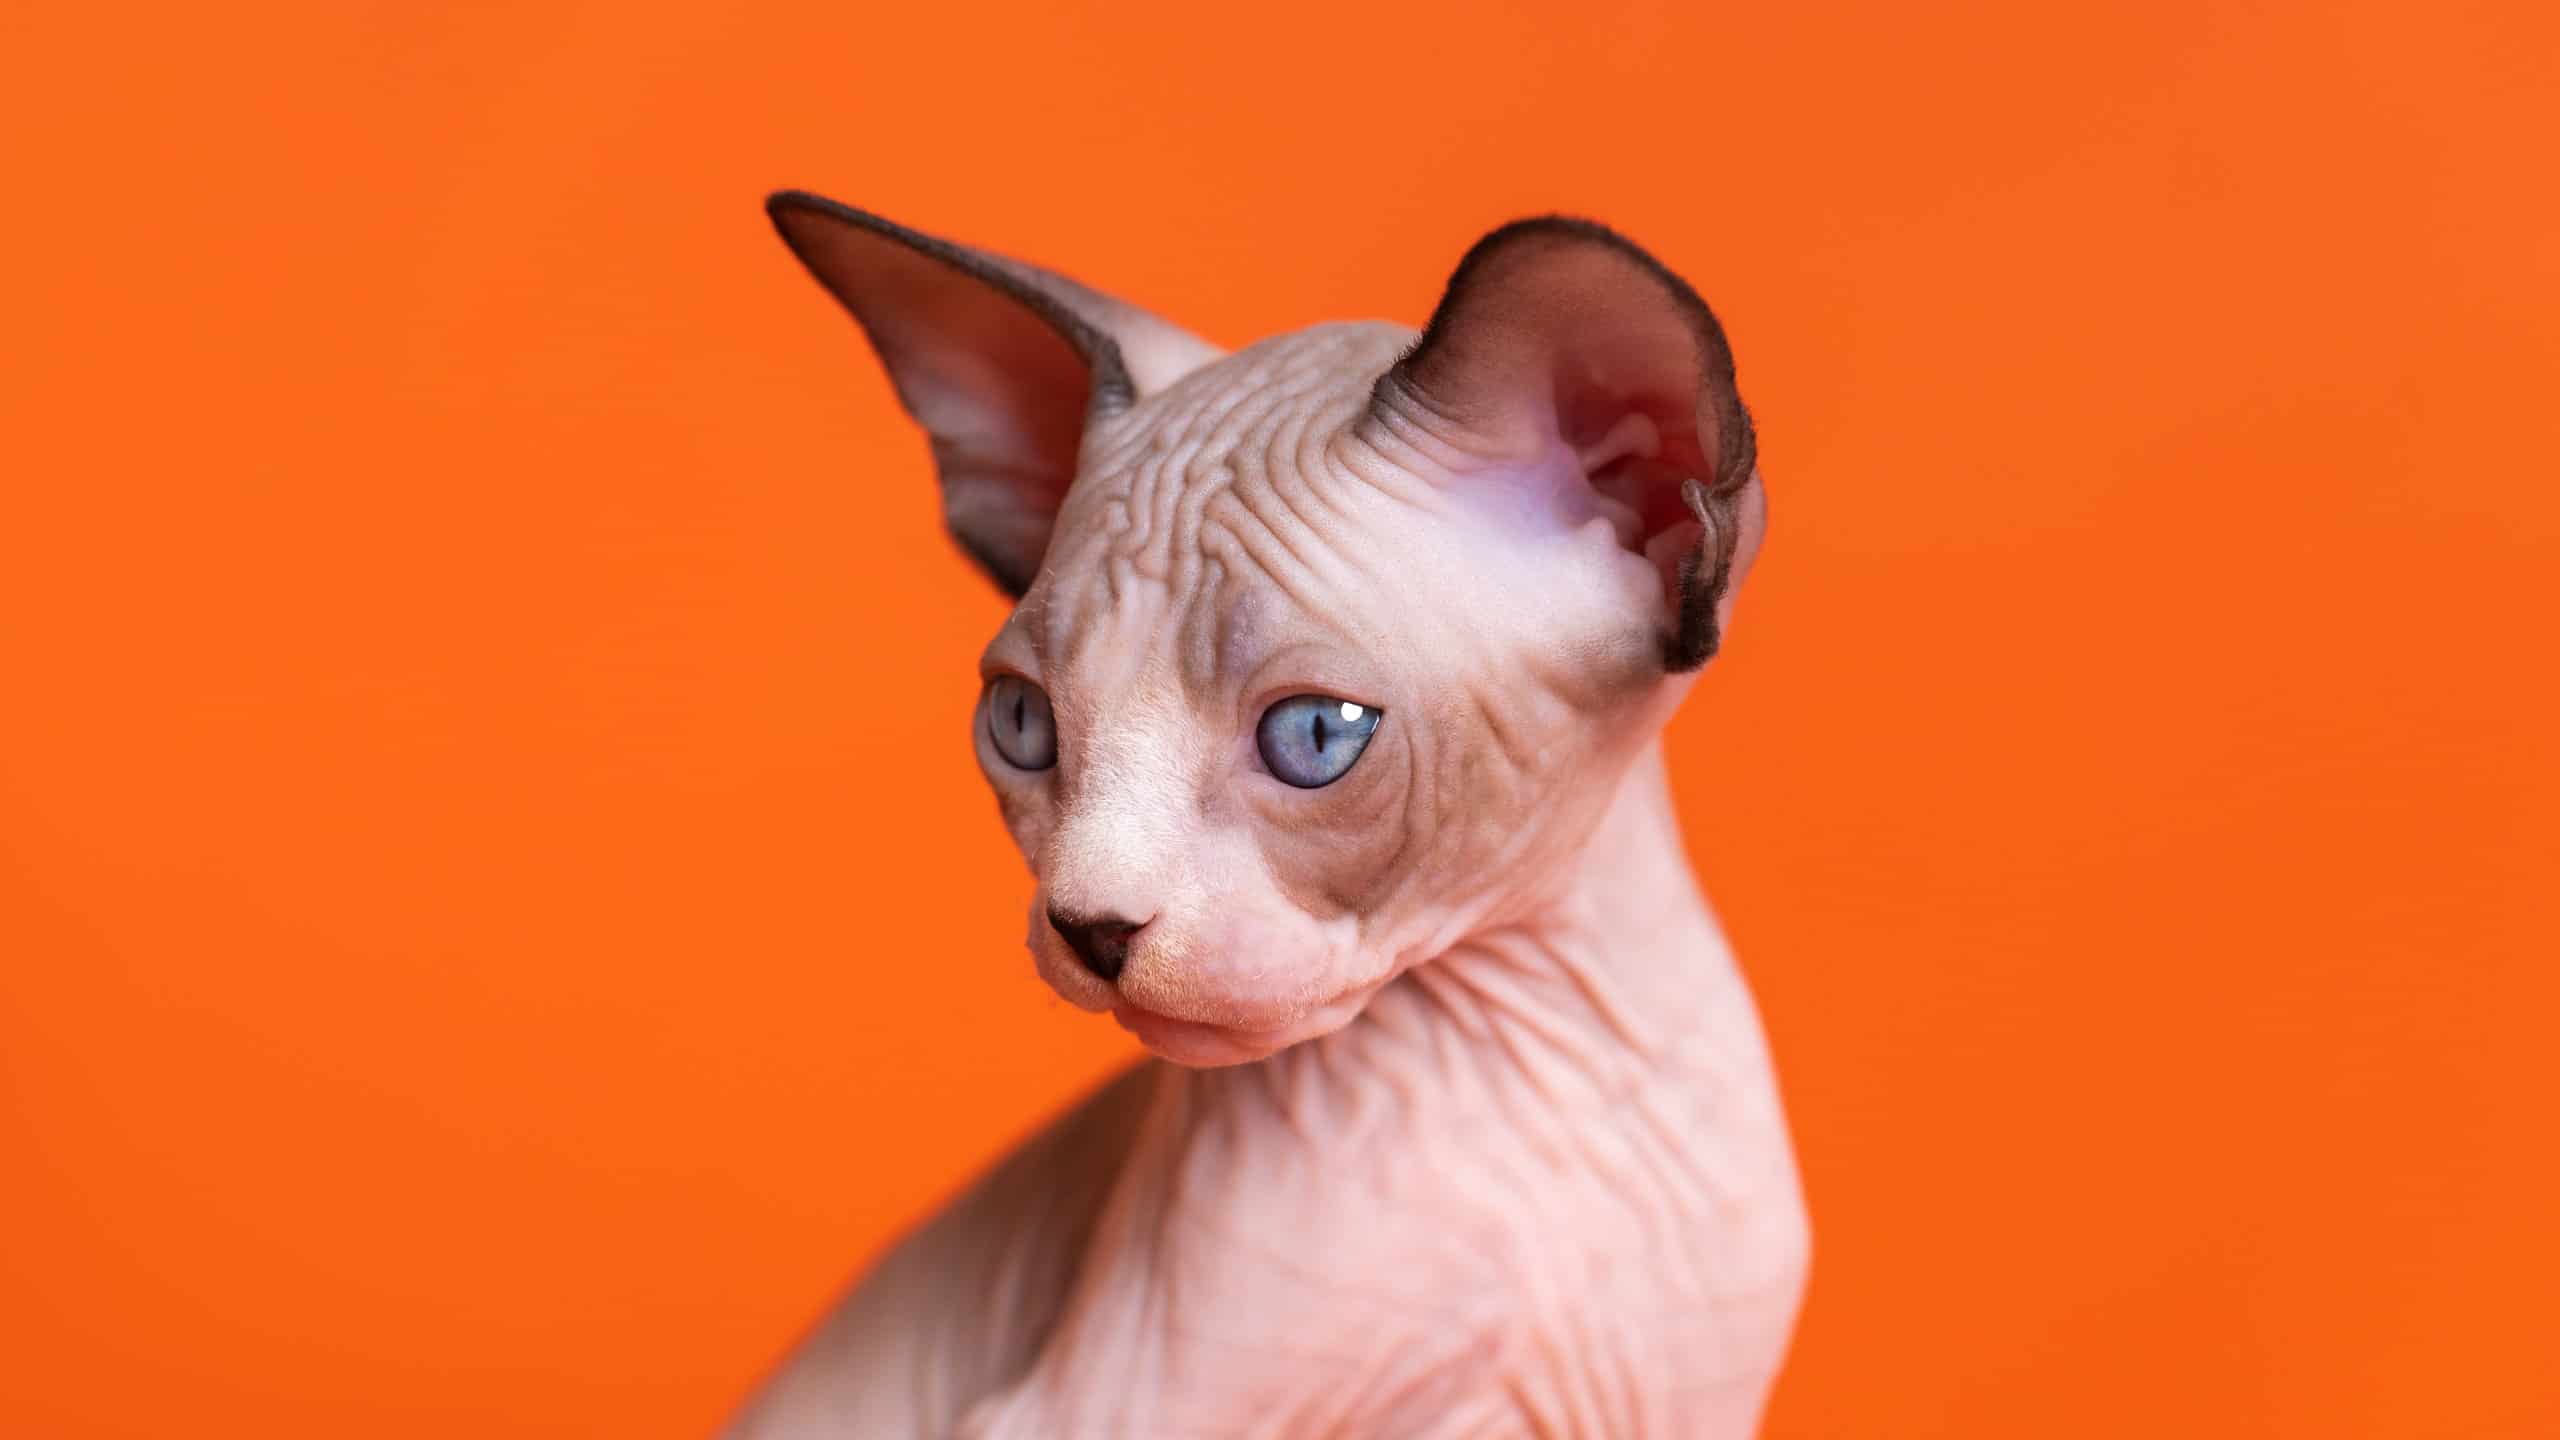 Close-up portrait of Sphynx Cat of seal mink and white color. Kitten with blue eyes looking away